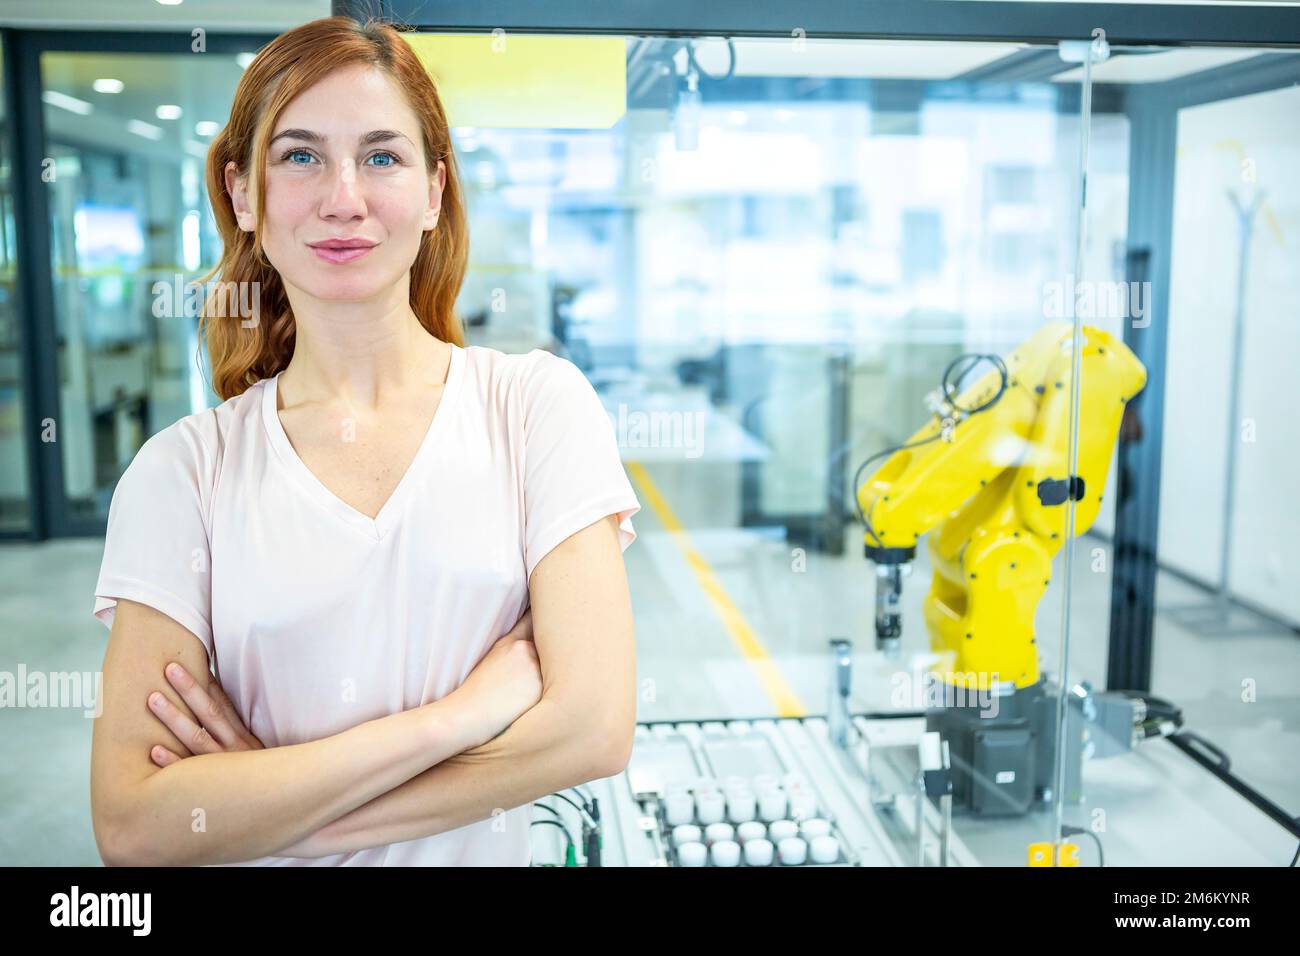 Industrial Robot Support Stock Photo